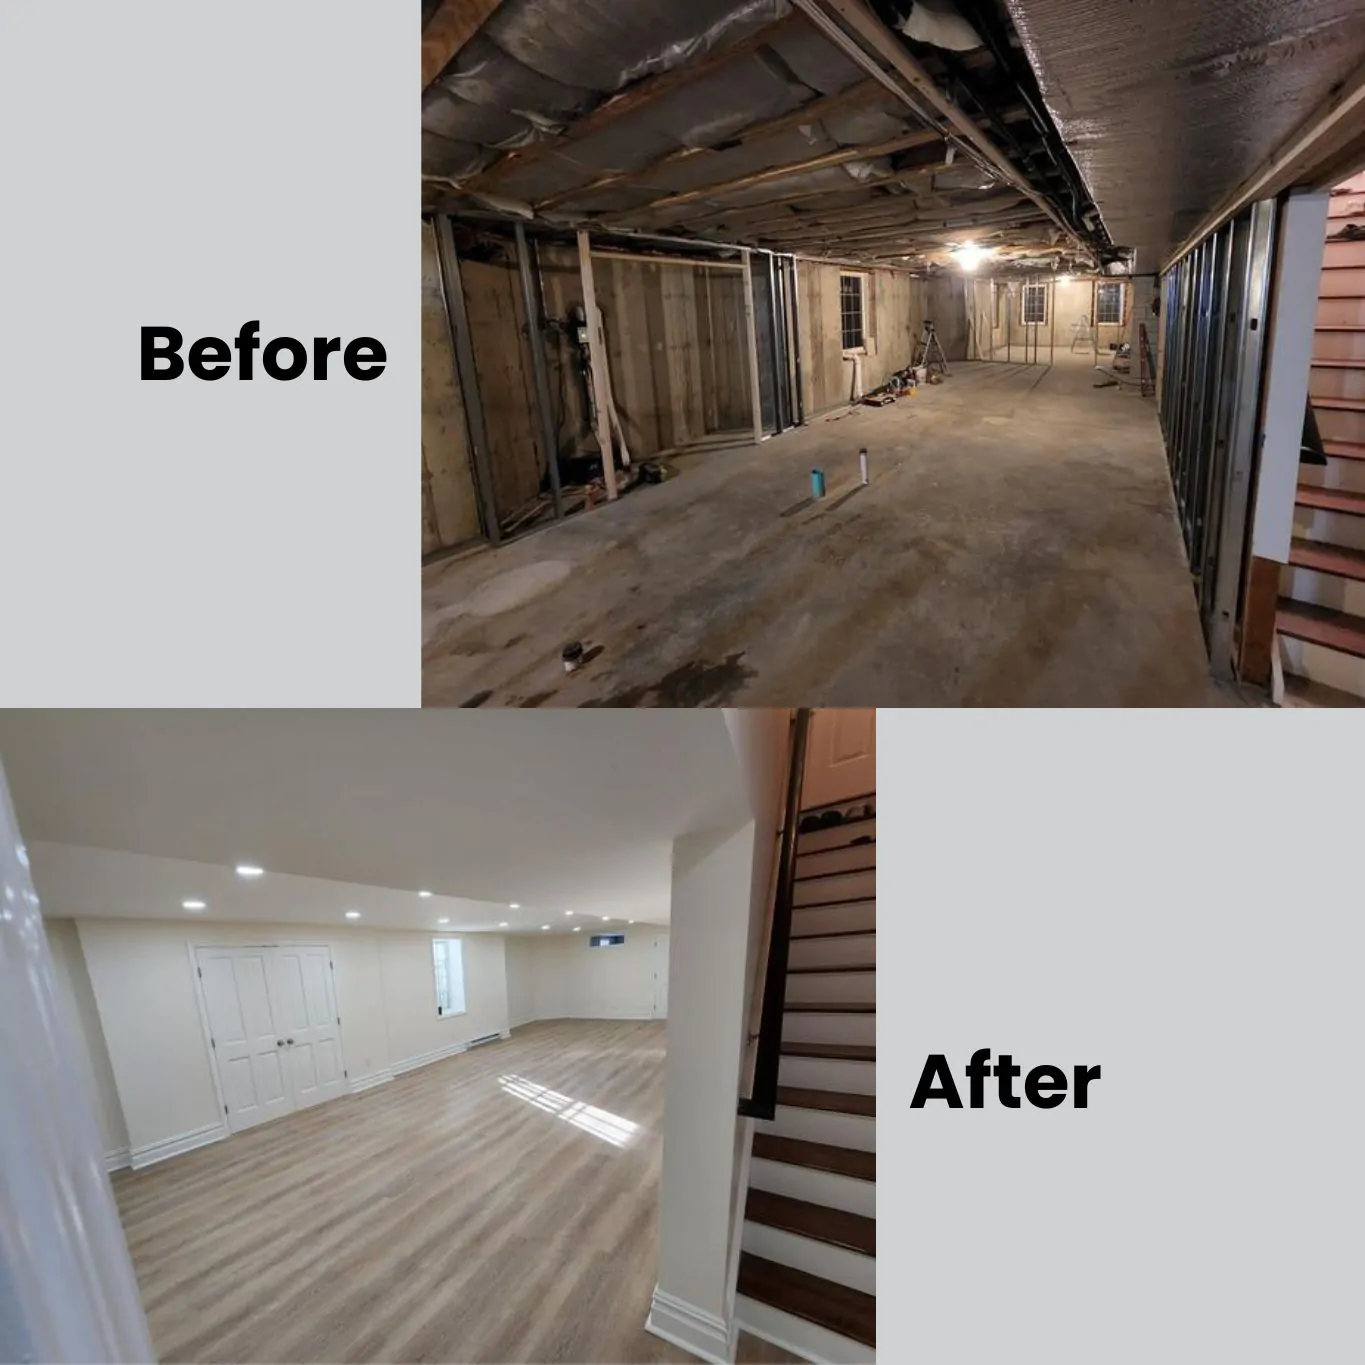 Before and After basement remodeling